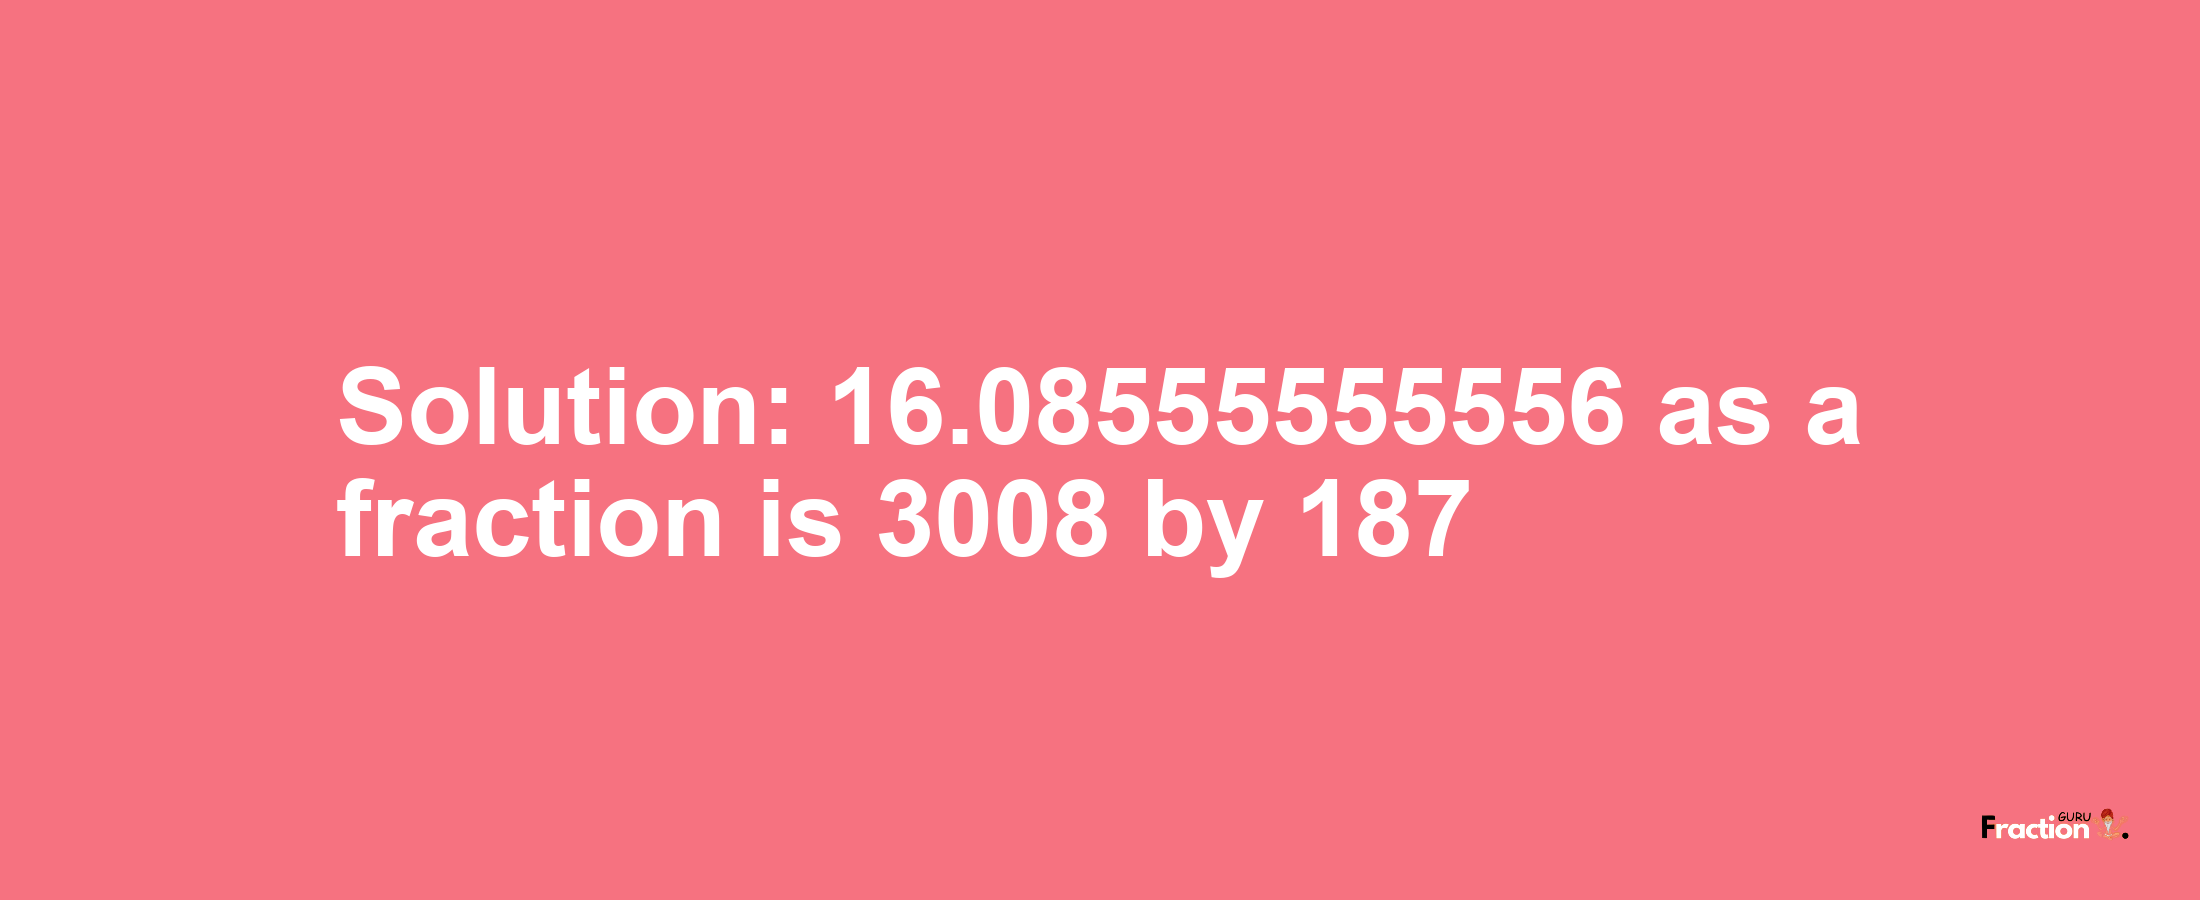 Solution:16.08555555556 as a fraction is 3008/187